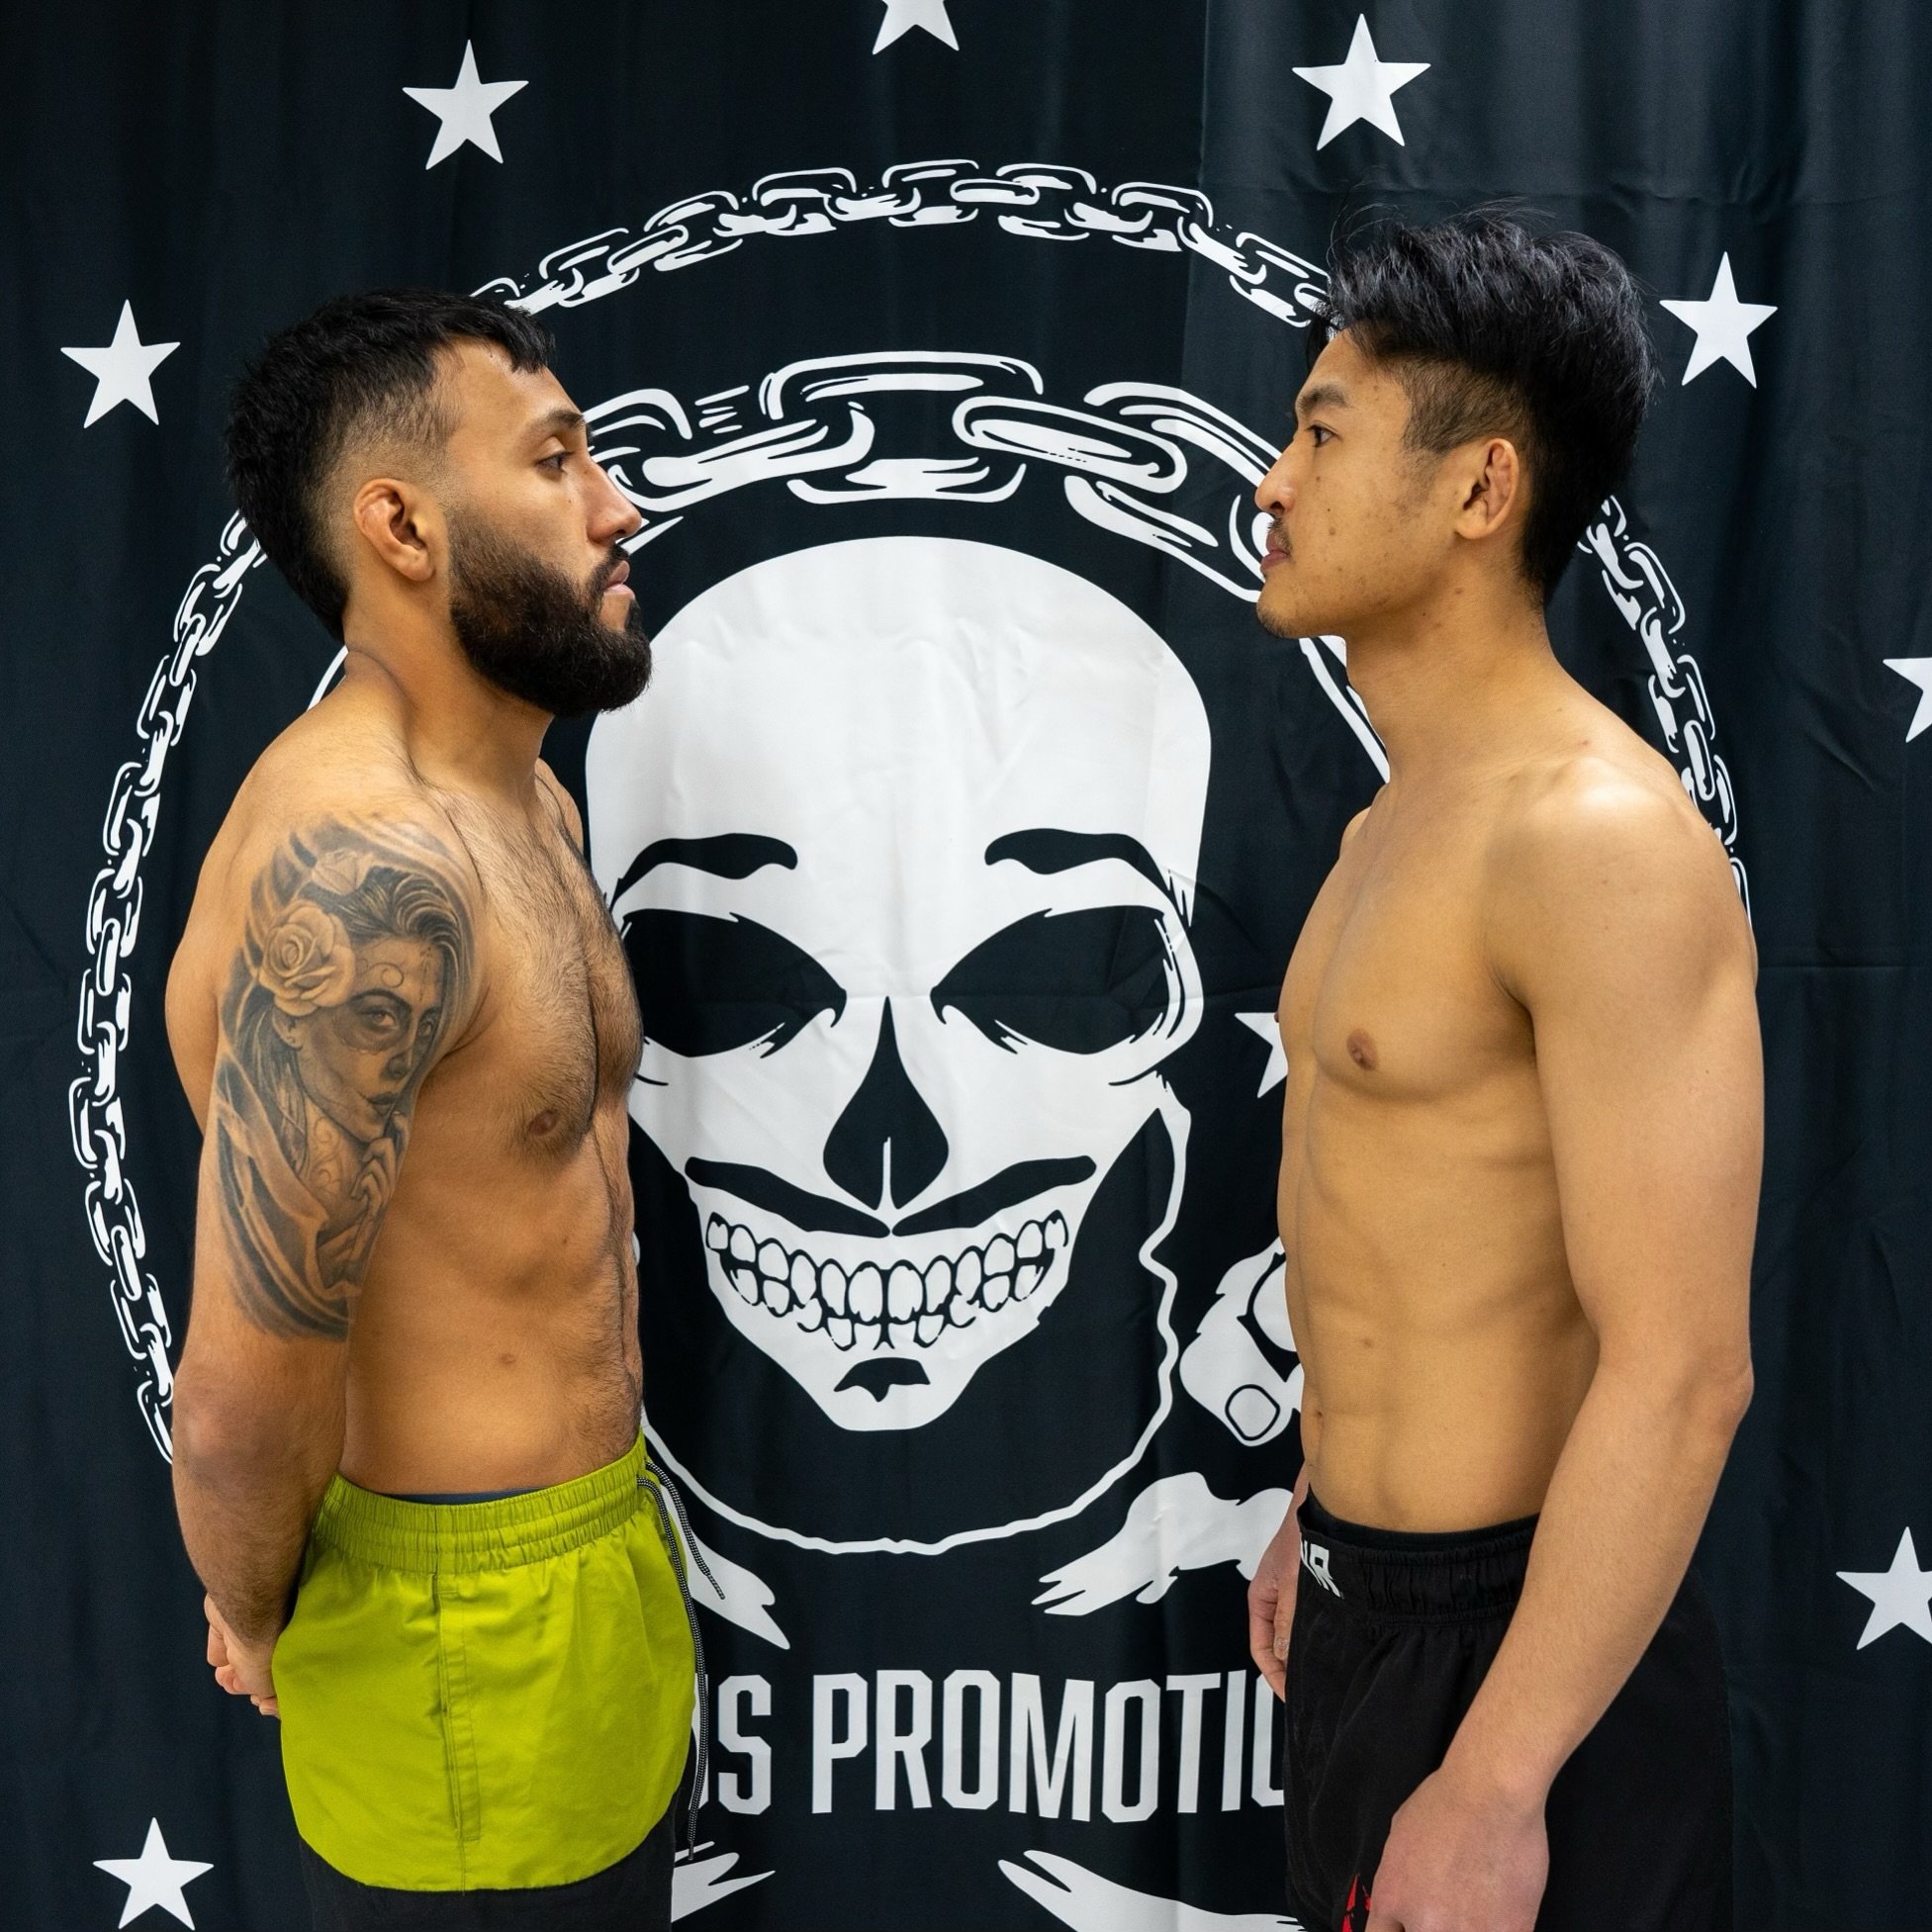 Nonstop MMA Action 😤
@caortegaaa vs @jovening_ 
.
It goes down tonight! Tickets will be available at the door! Can&rsquo;t make it? Order the pay-per-view! Link in bio
Doors open at 5:30pm
Show starts at 6:30pm
.
Venue: The PIAZZA
85 Executive Dr. A